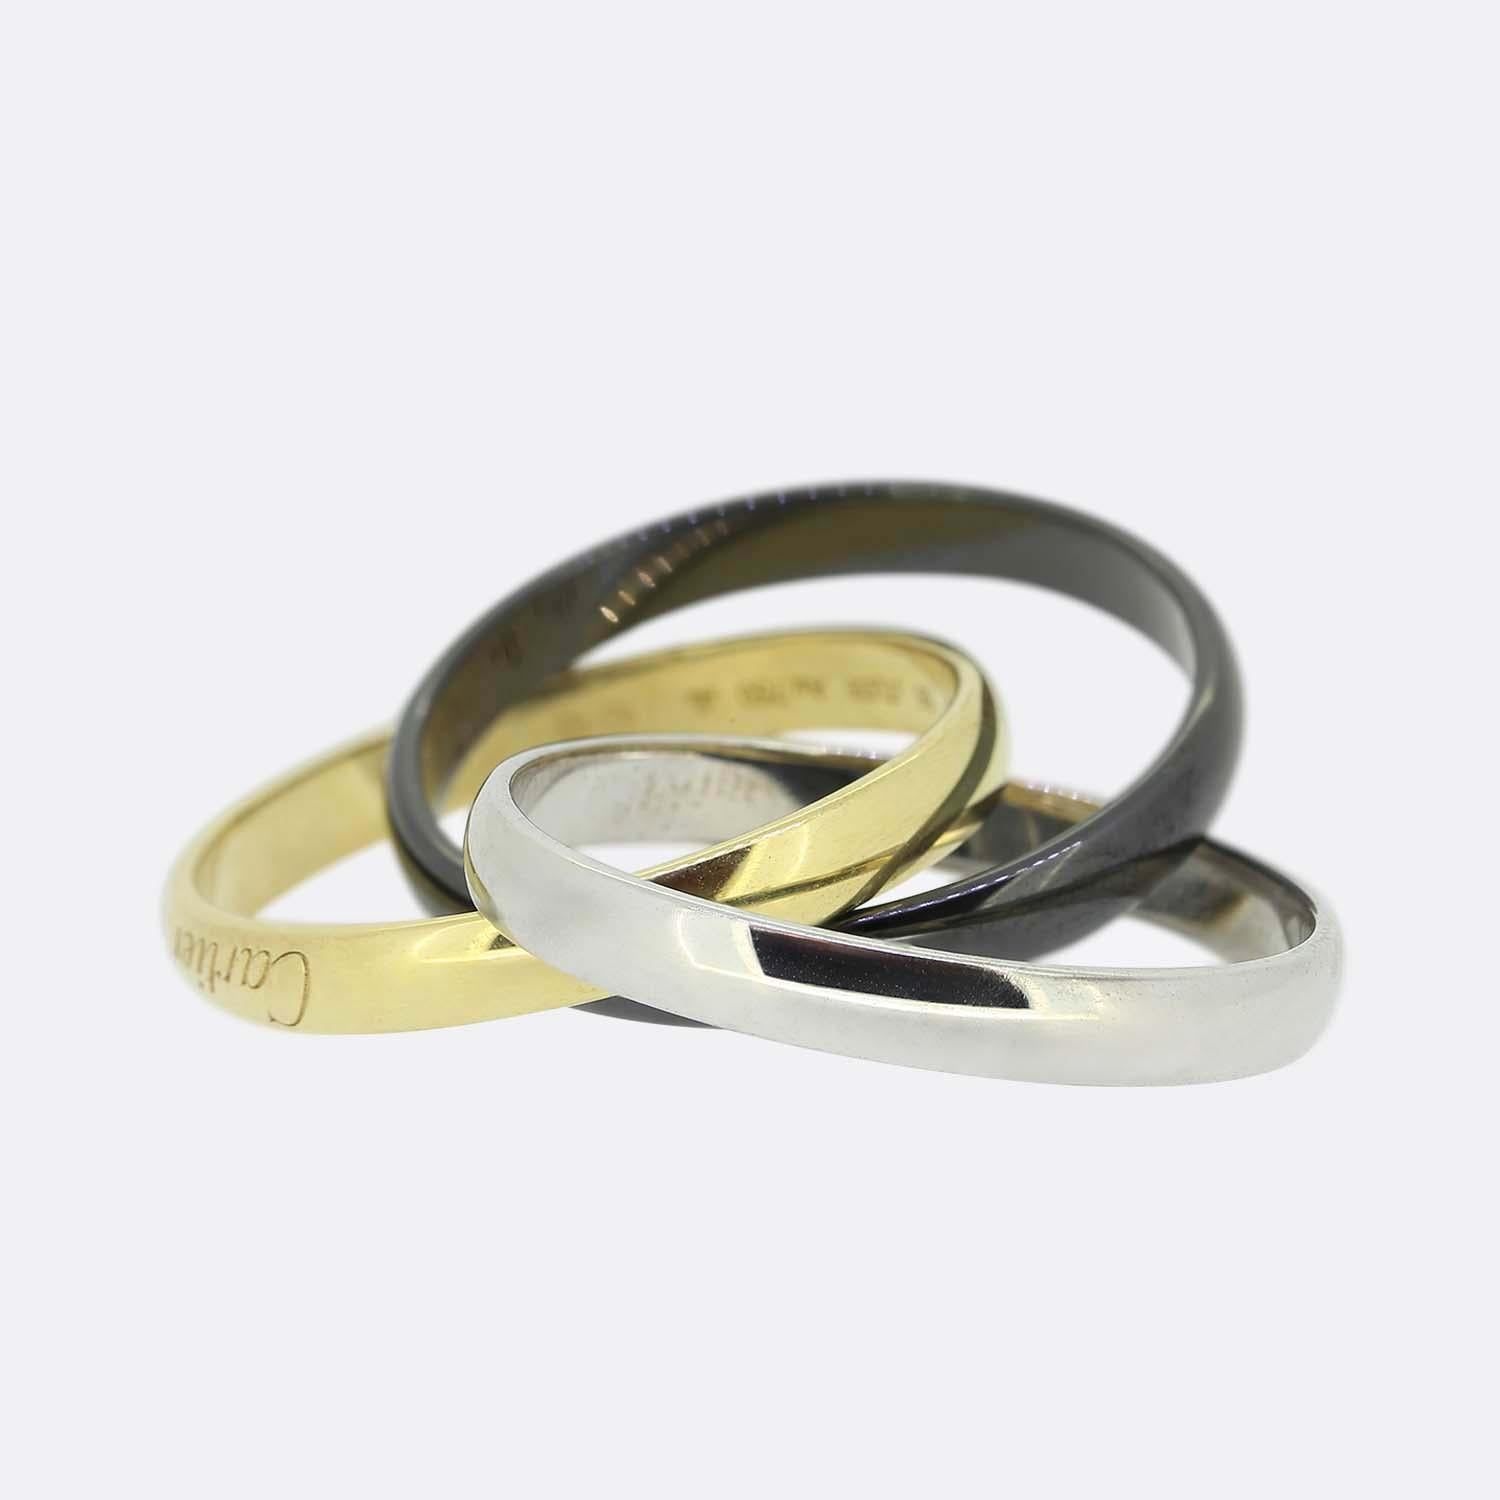 Here we have an 18ct gold and ceramic trinity ring from the world renowned luxury jewellery house of Cartier. This ring features three interwinding bands. One white gold, one yellow gold and one in darkened ceramic. The yellow gold has been softly